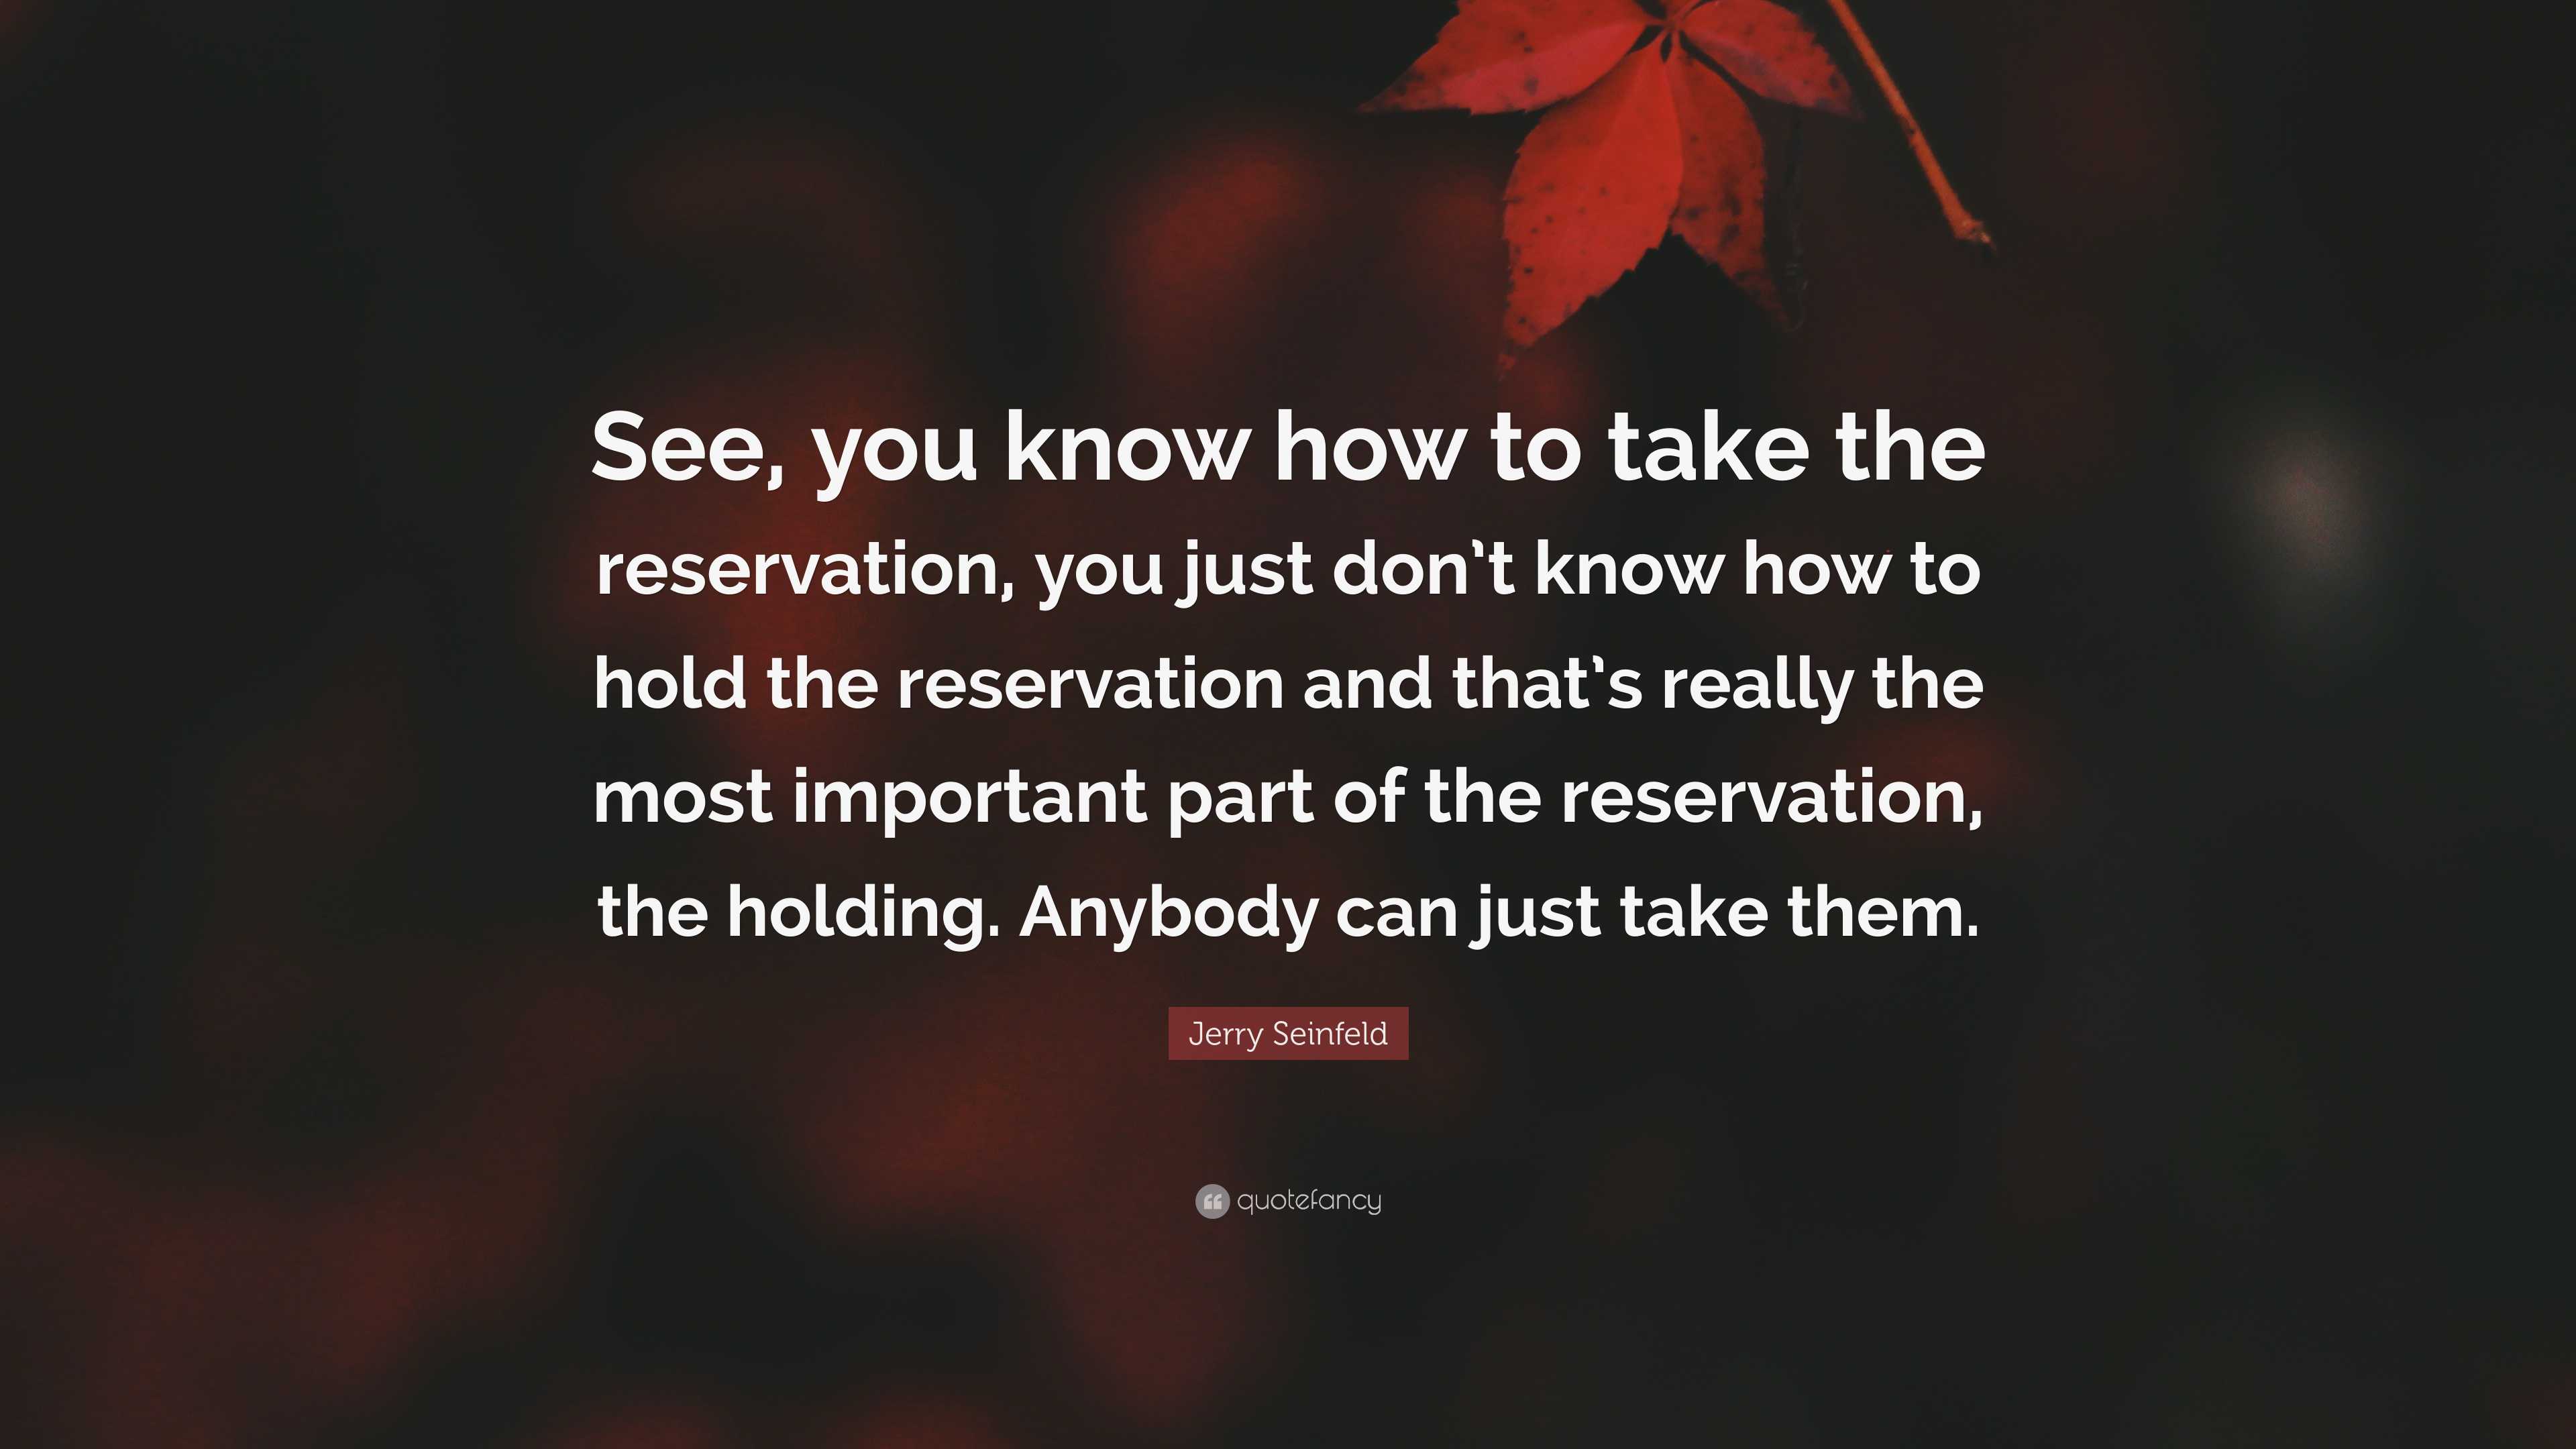 Jerry Seinfeld Quote: “See, you know how to take the reservation, you ...